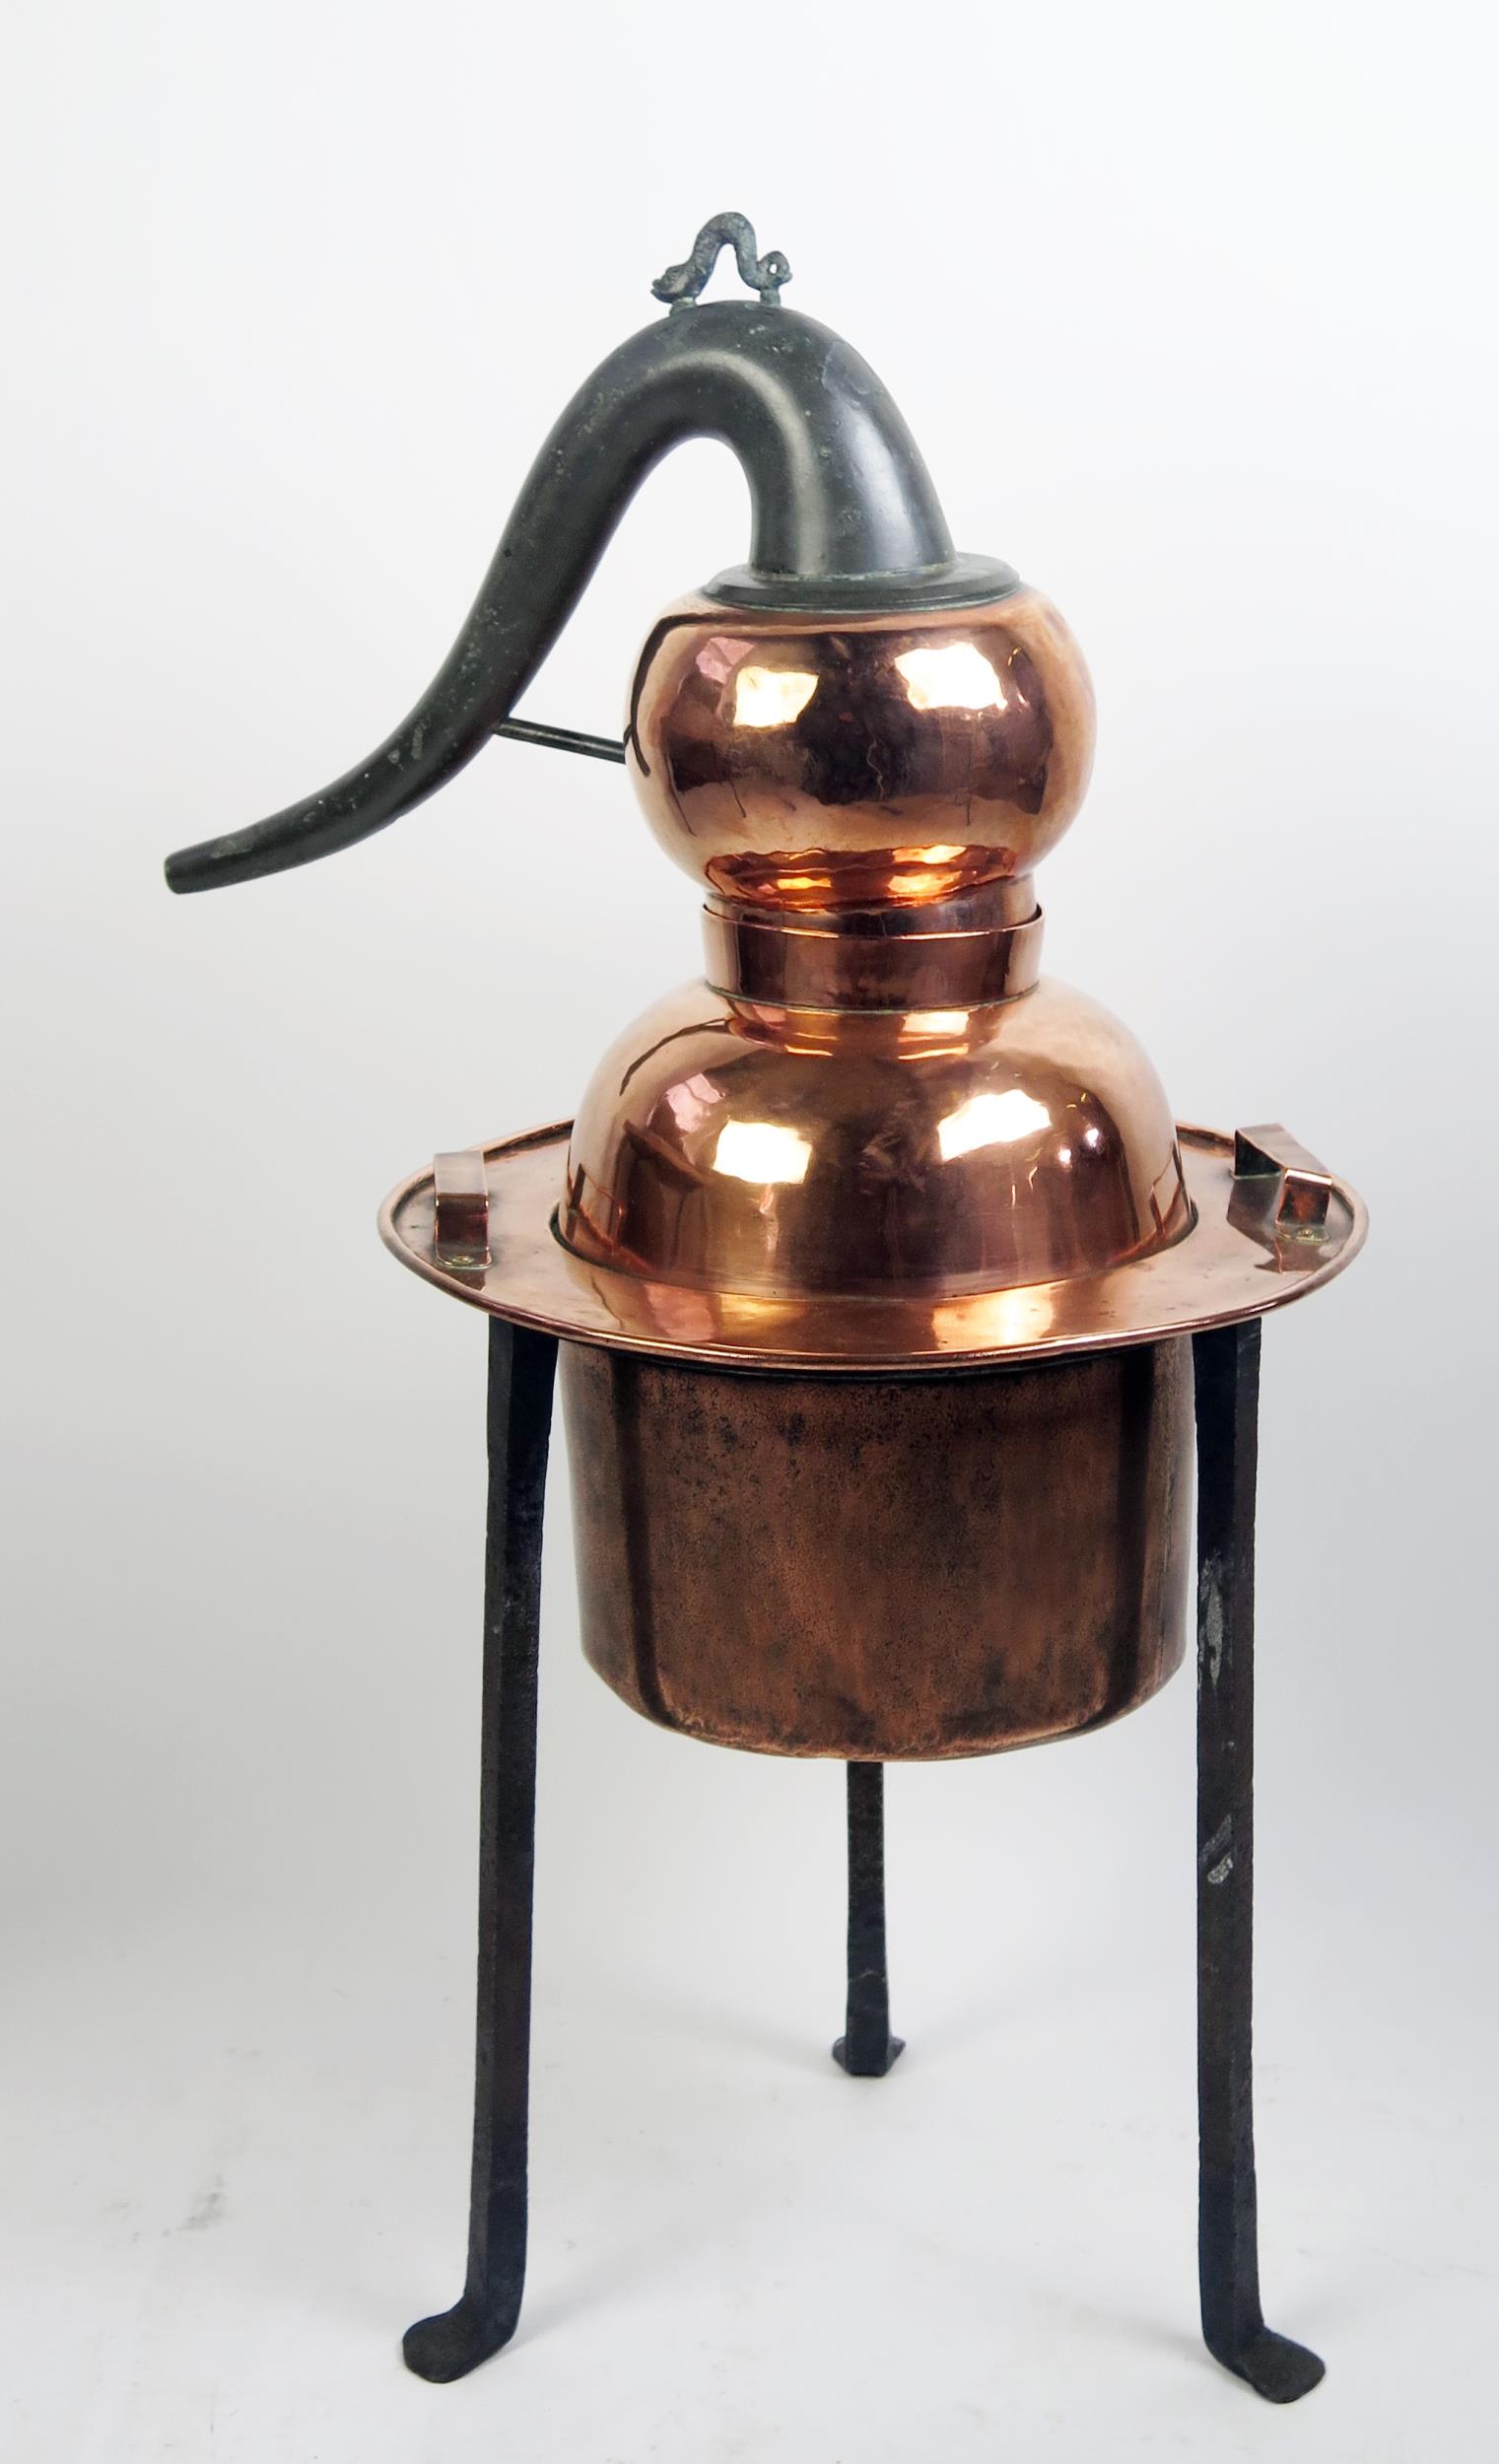 A 19th century French polished copper still, with swept metal spout, with cylindrical reservoir,